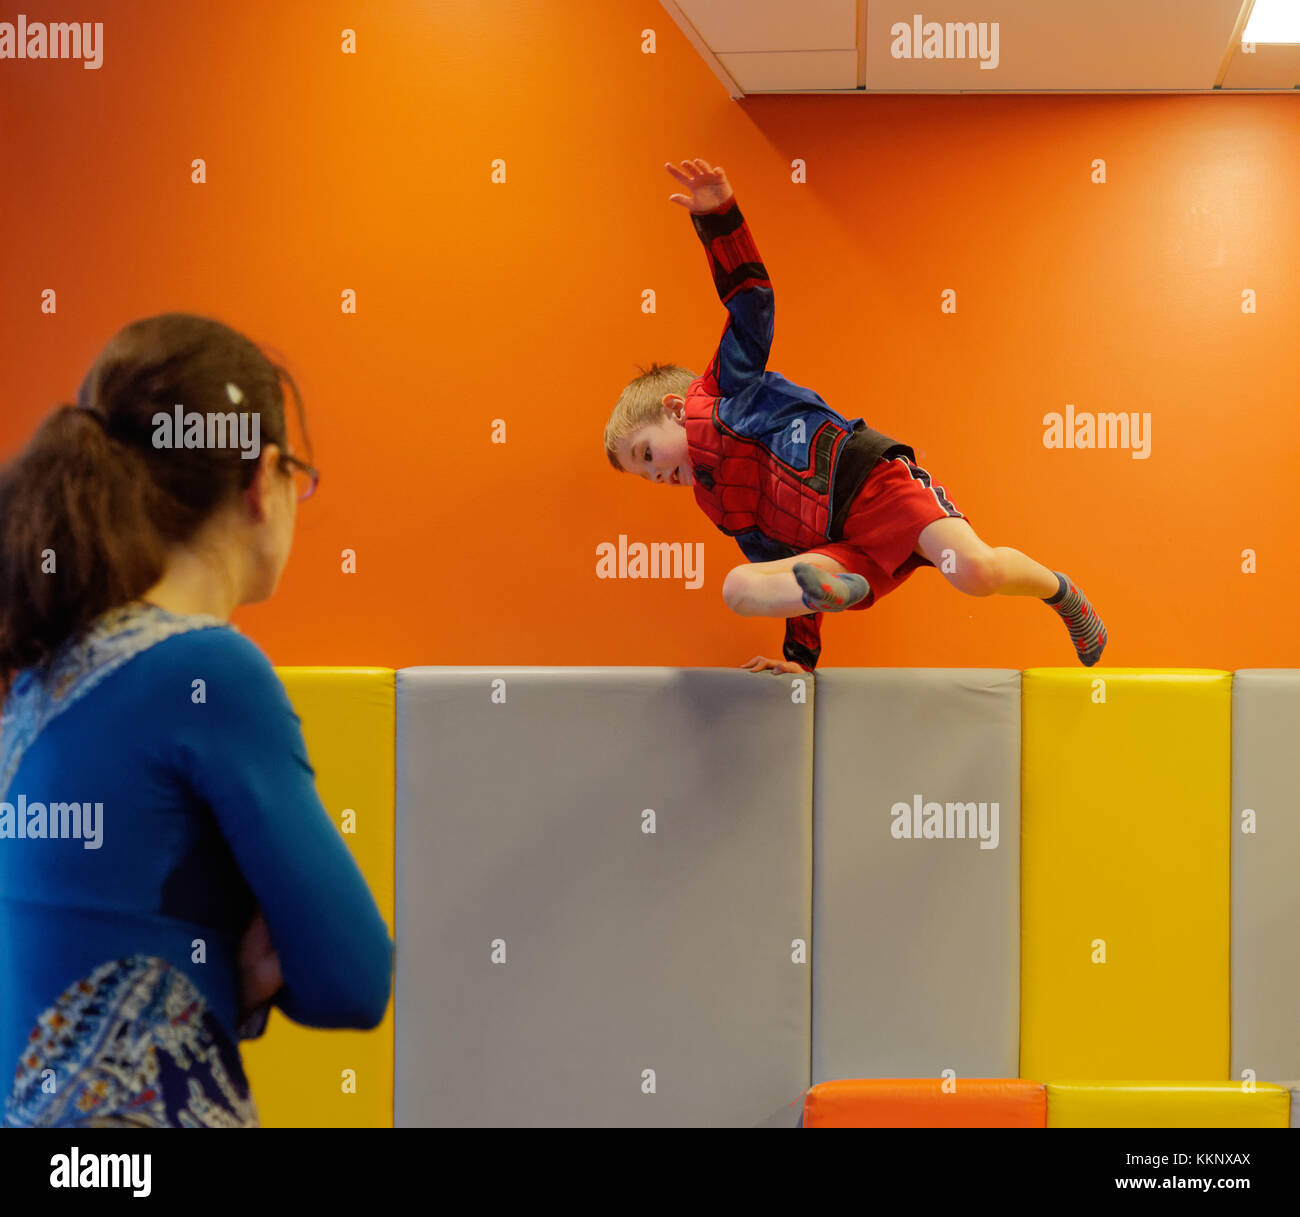 A little boy (5 yrs old) jumping in a padded play area Stock Photo